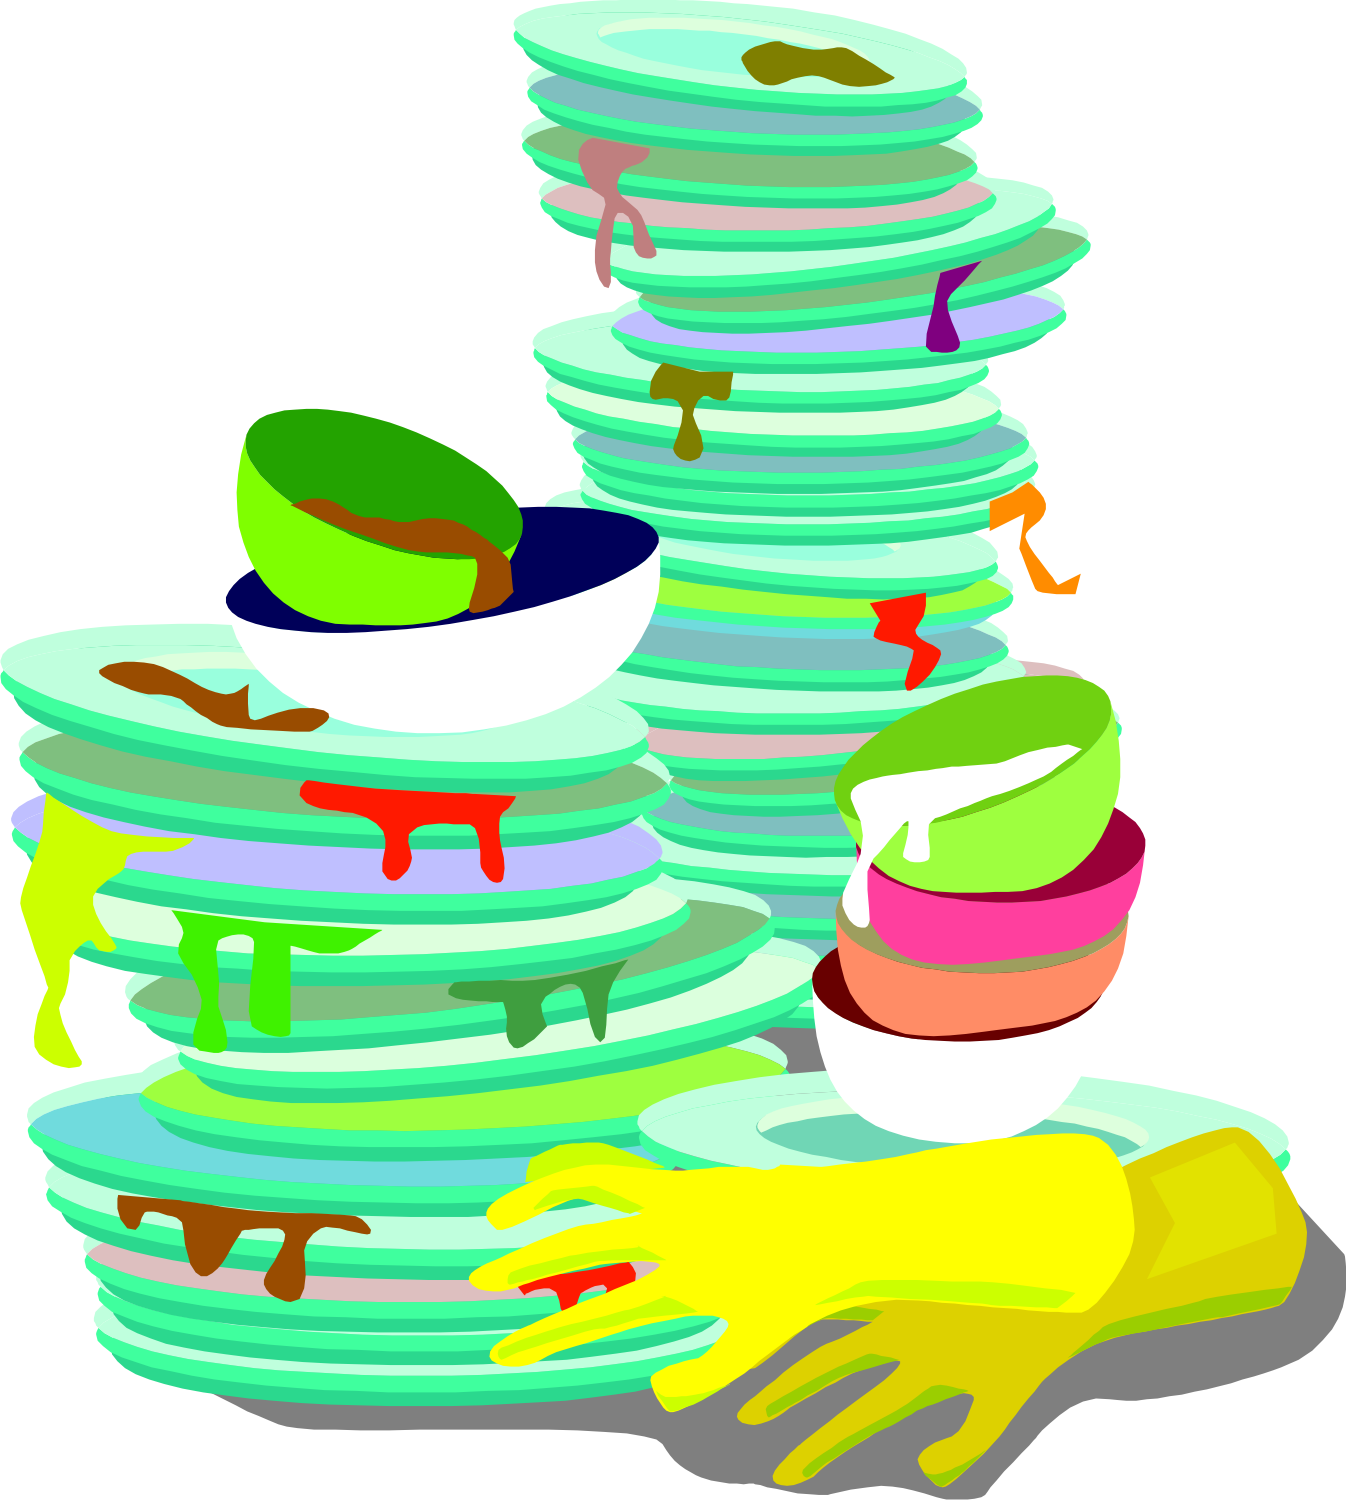 Dirty dishes in sink clipart 